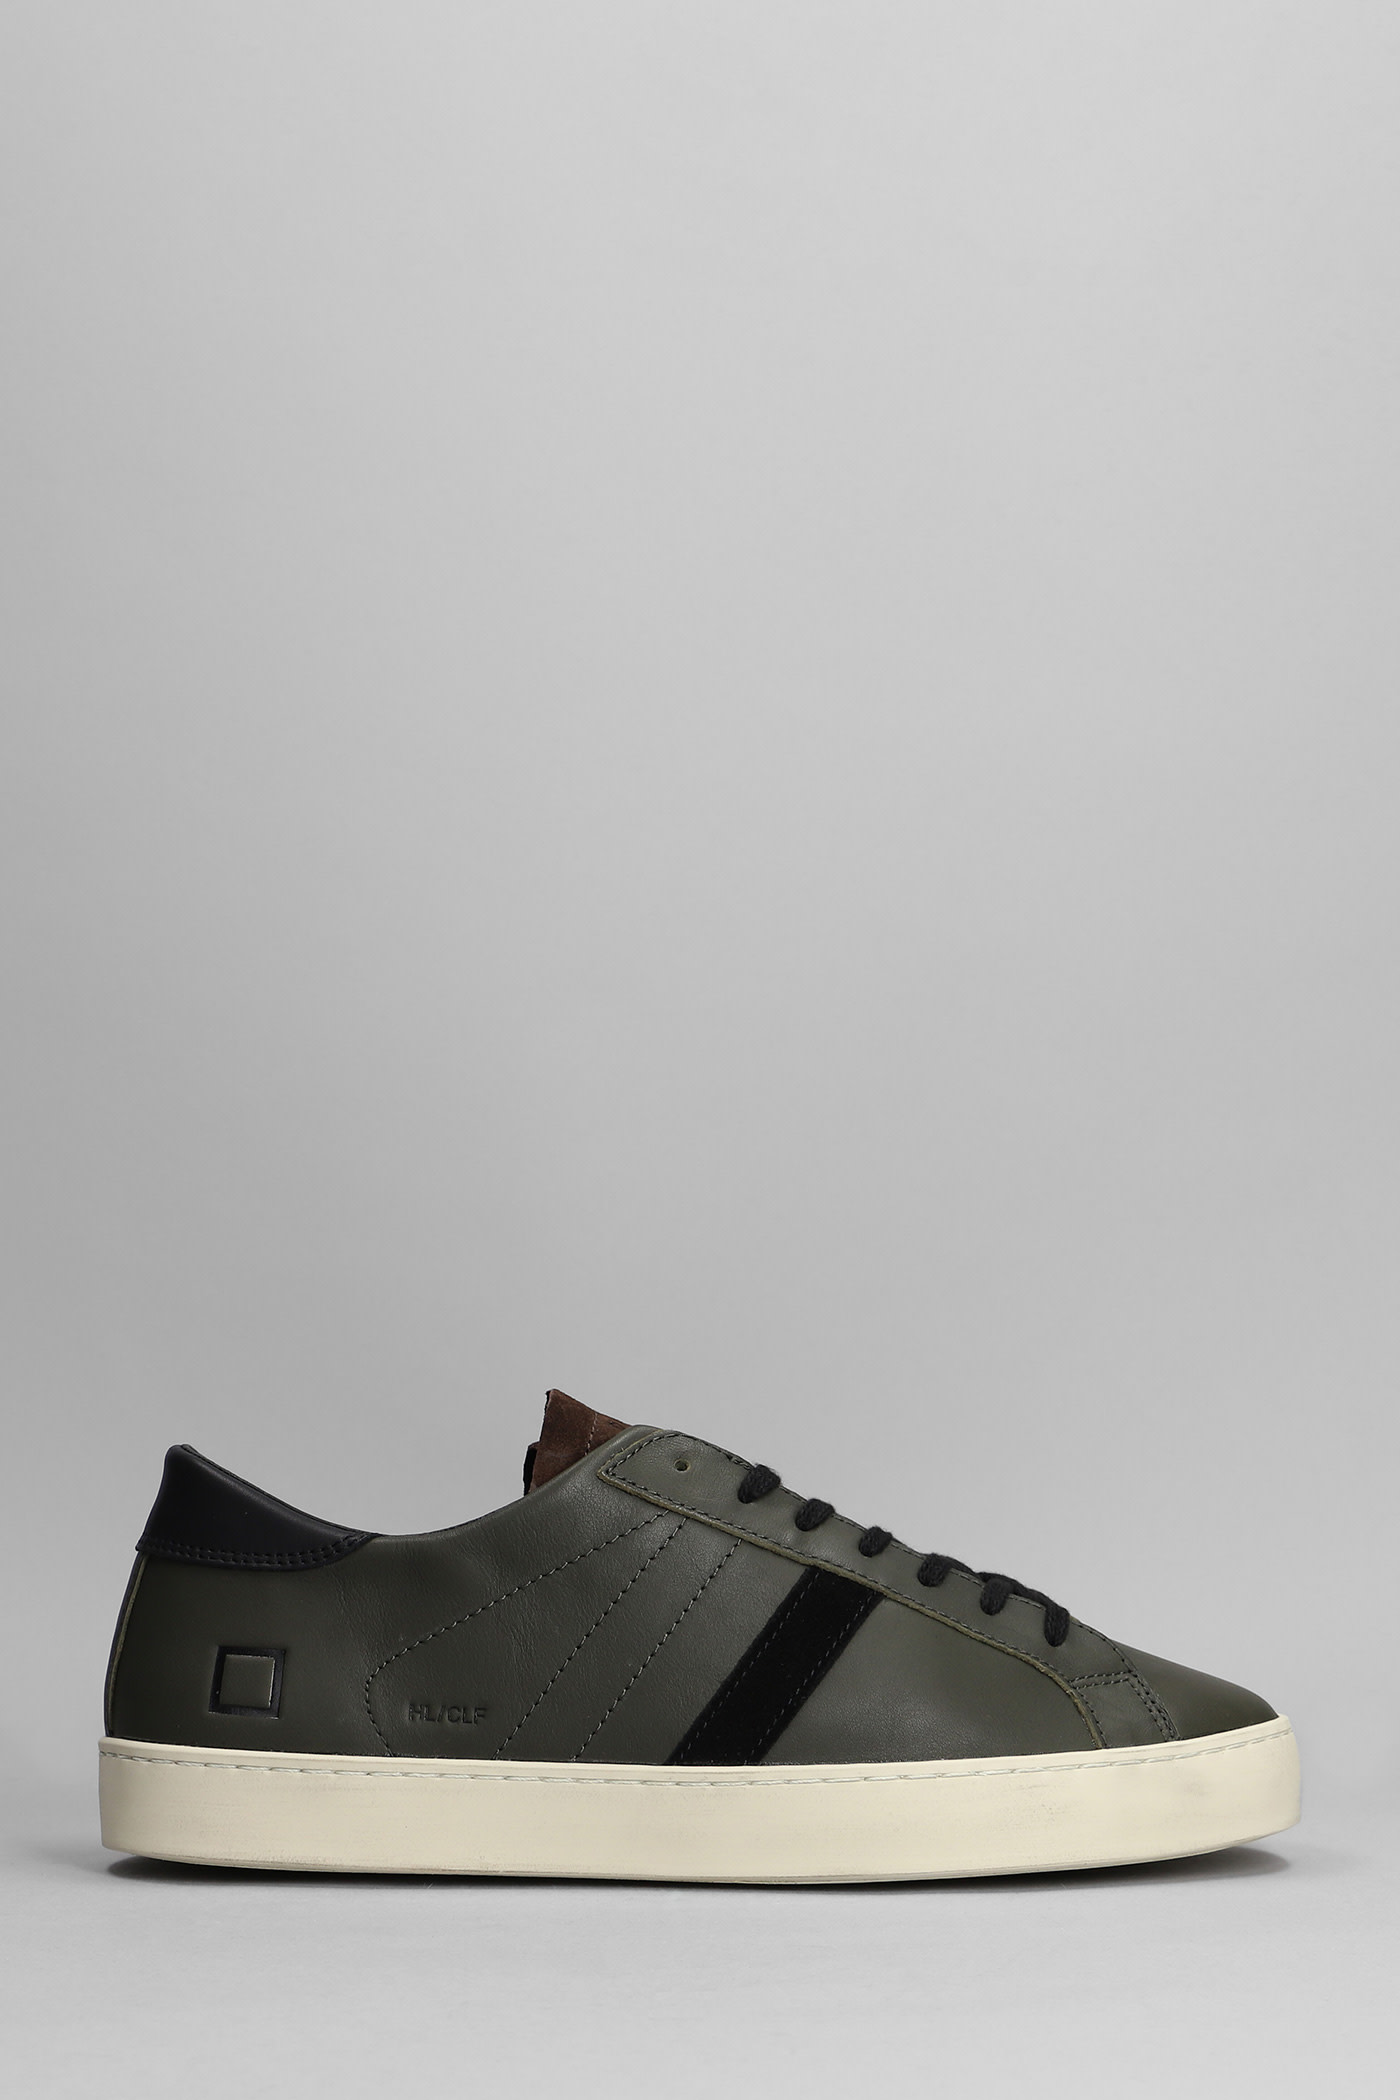 D.A.T.E. Hill Low Sneakers In Green Leather